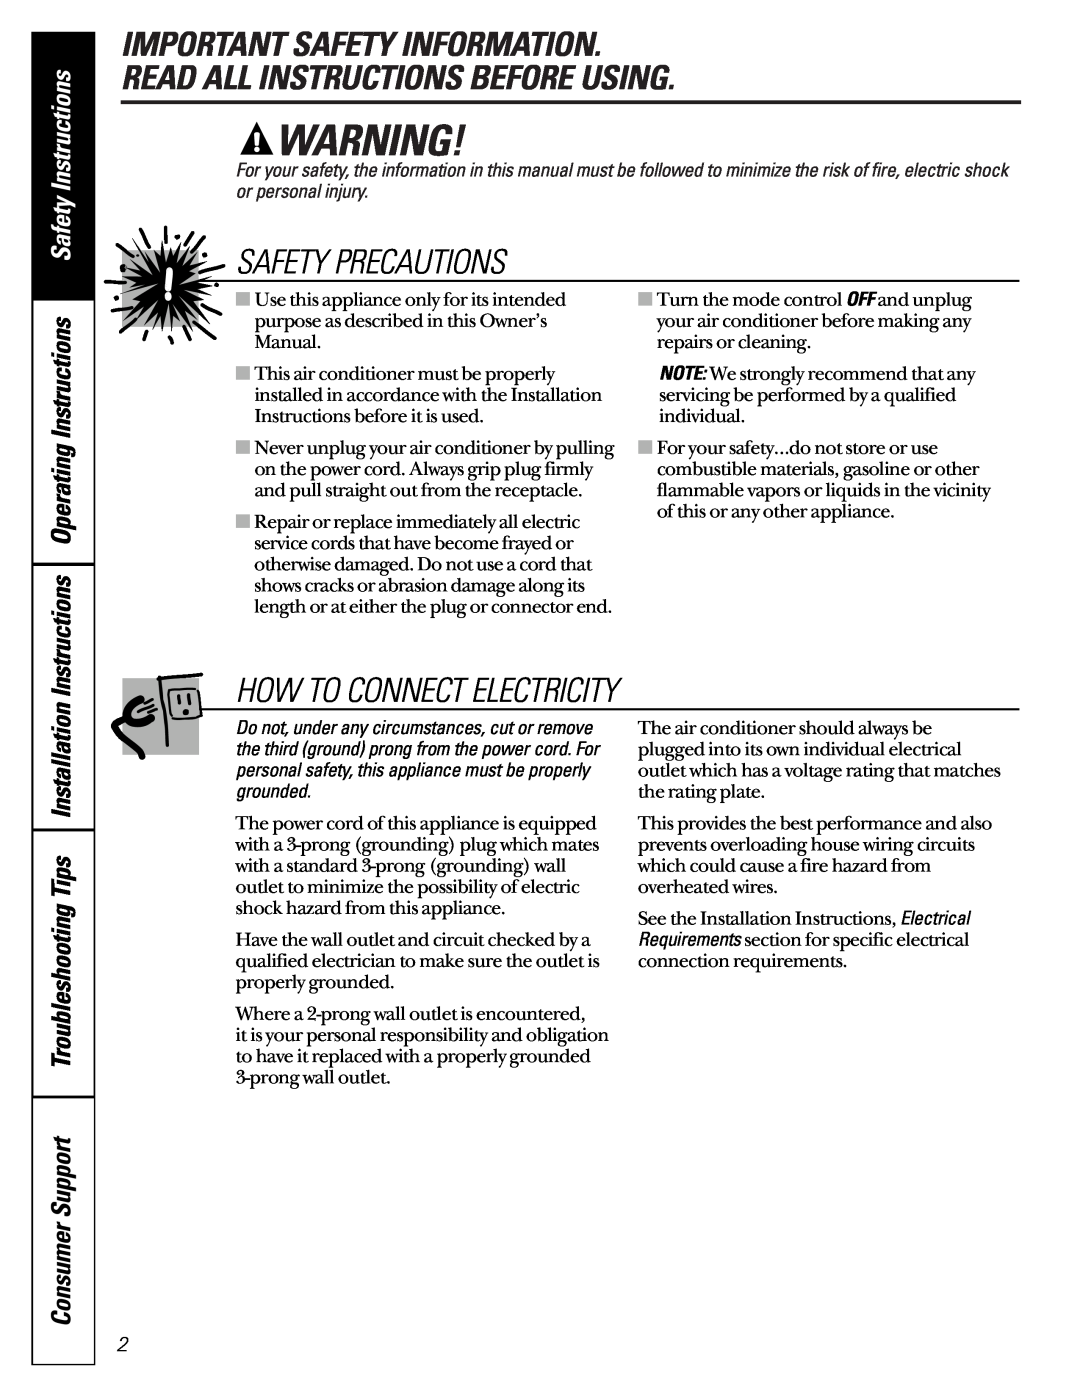 GE ASM08 Important Safety Information, Read All Instructions Before Using, Safety Precautions, How To Connect Electricity 